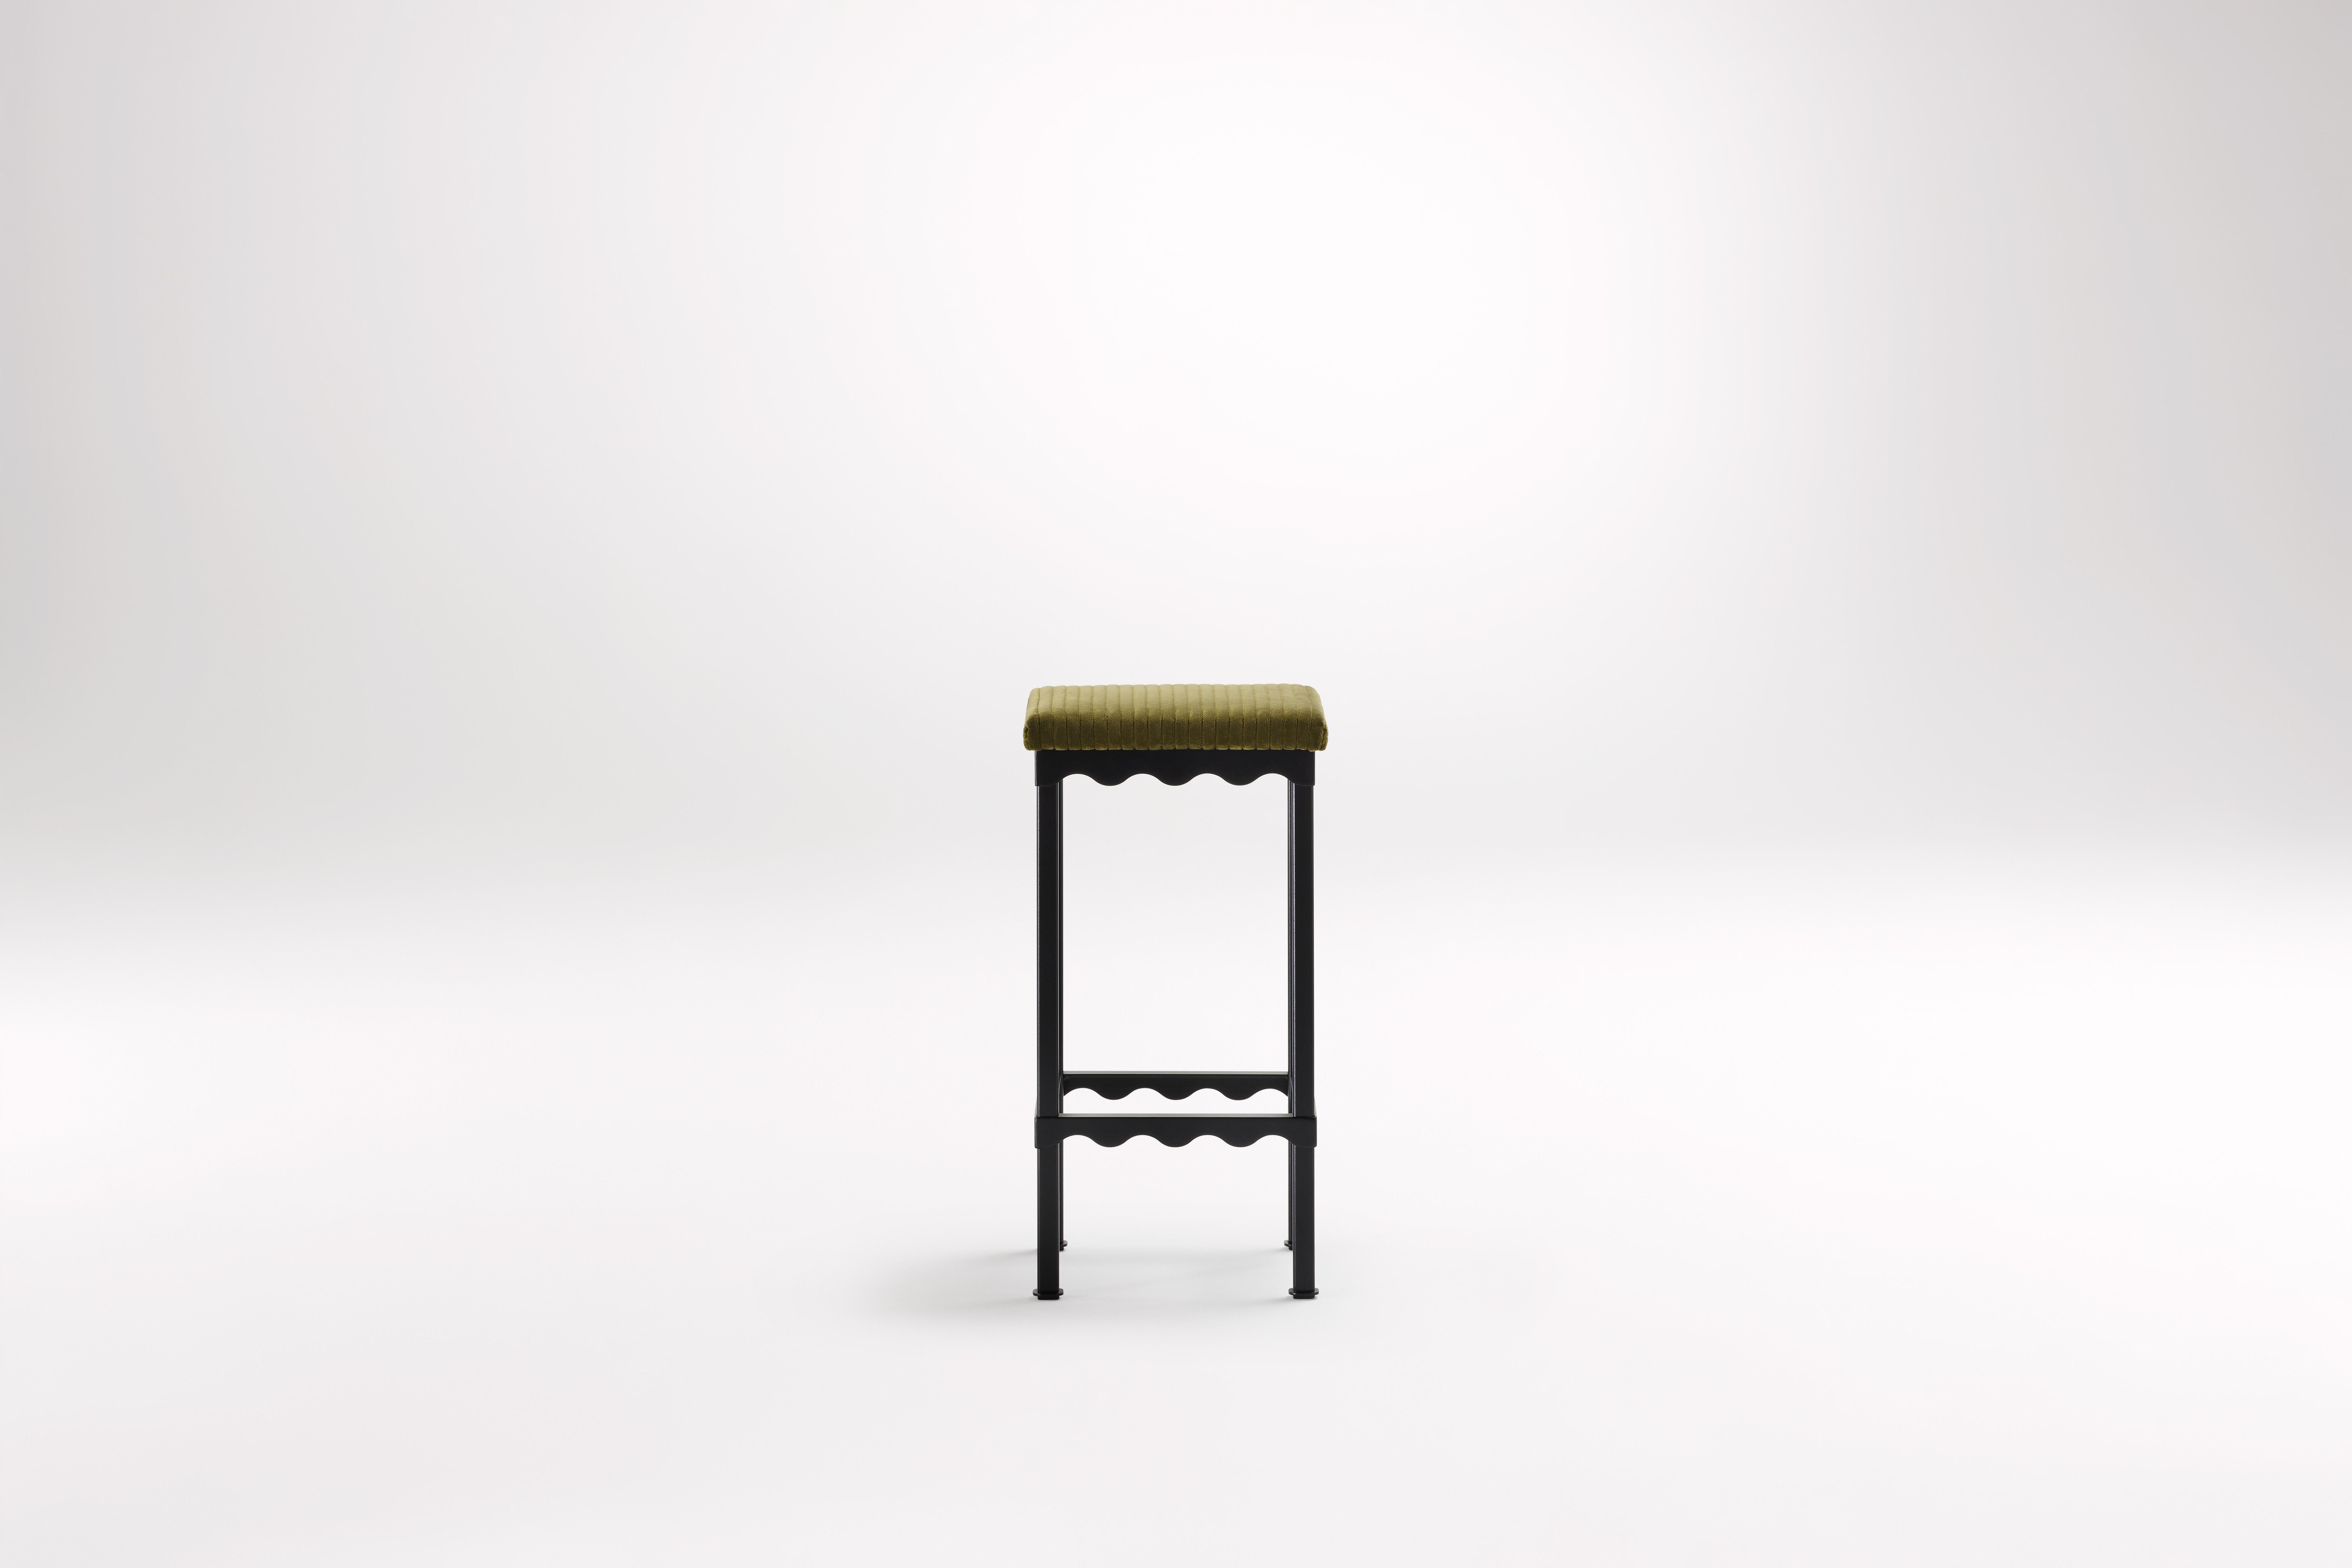 Oleander Bellini High Stool by Coco Flip
Dimensions: D 34 x W 34 x H 65/75 cm
Materials: Timber / Stone tops, Powder-coated steel frame. 
Weight: 8kg
Frame Finishes: Textura Black.

Coco Flip is a Melbourne based furniture and lighting design